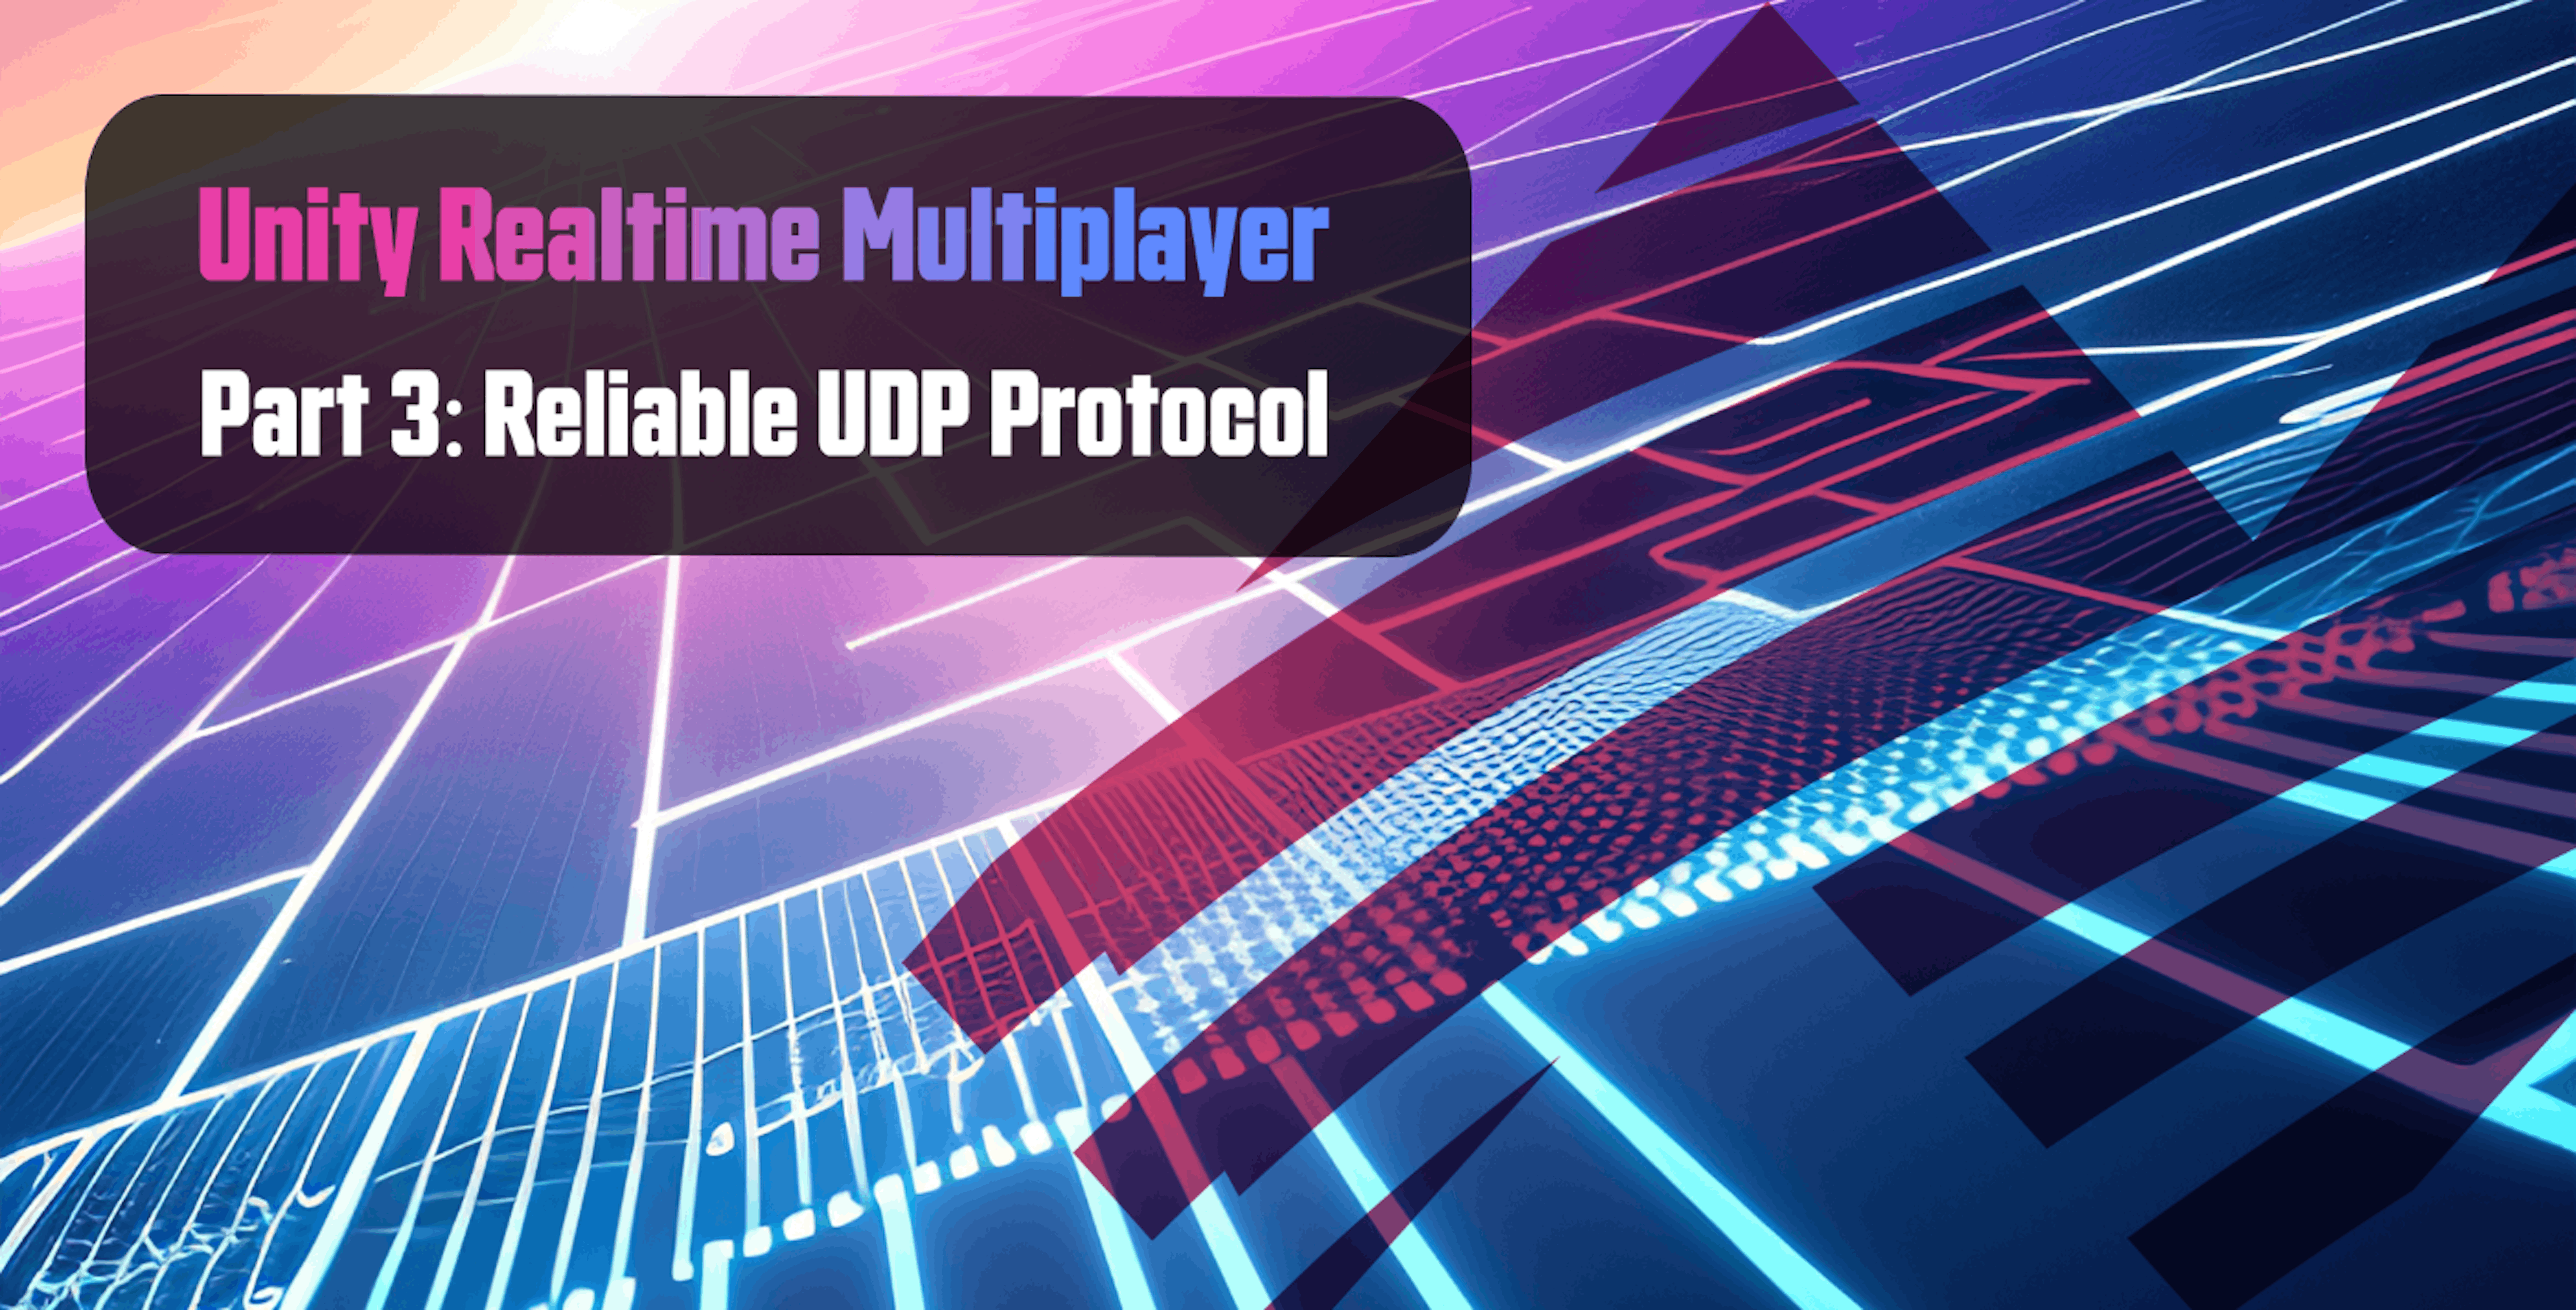 featured image - Unity Realtime Multiplayer, Part 3: Reliable UDP Protocol